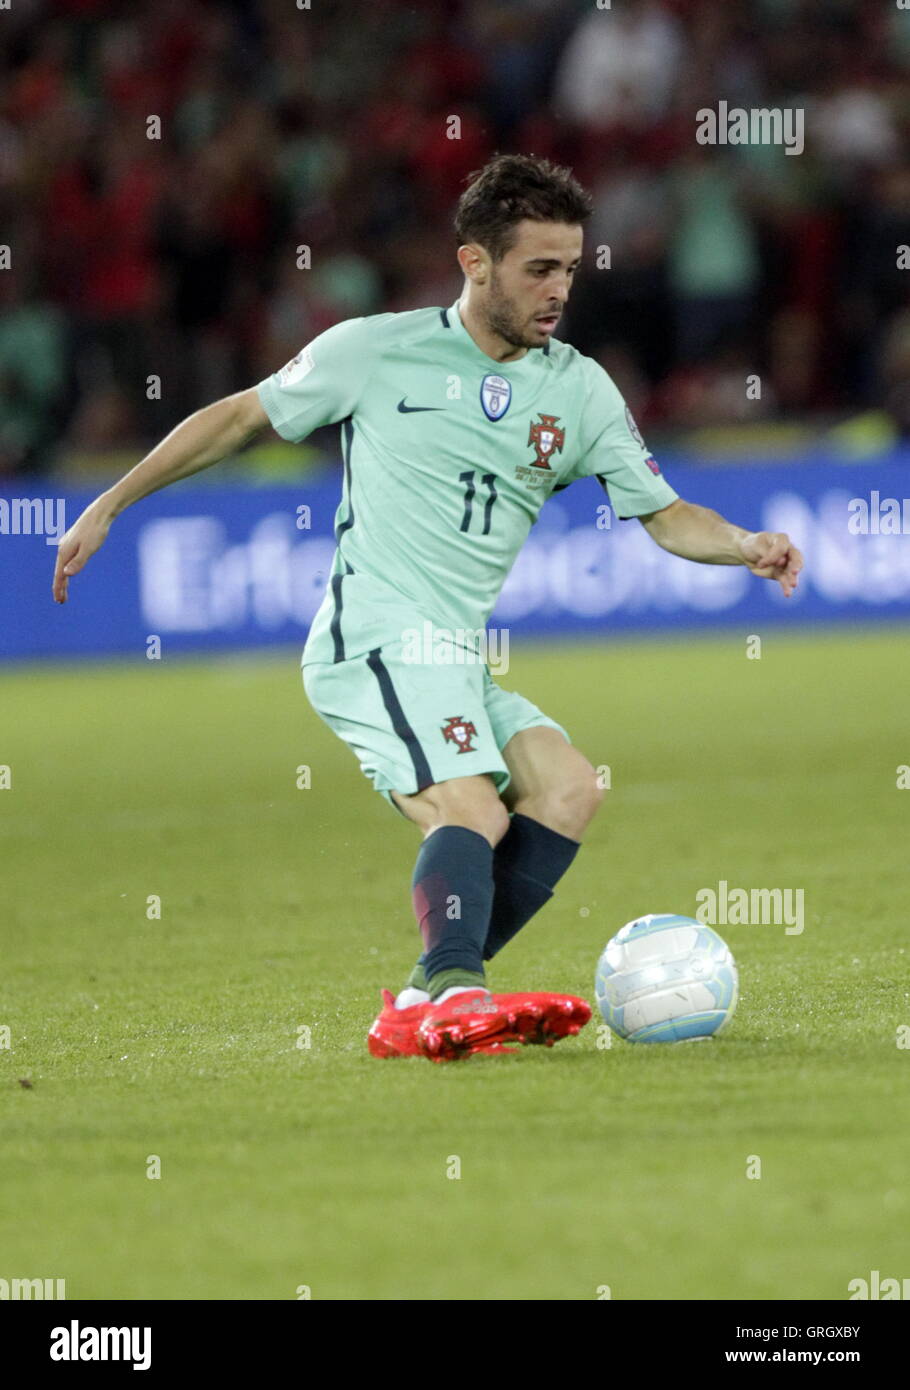 Basel, Switzerland. 6 September 2016 Valon Behrami in action during the qualifying match of the World Cup Group B Switzerland against Portugal at St Jakob Park in Basel, Switzerland Credit:  Laurent Lairys/Agence Locevaphotos/Alamy Live News Stock Photo